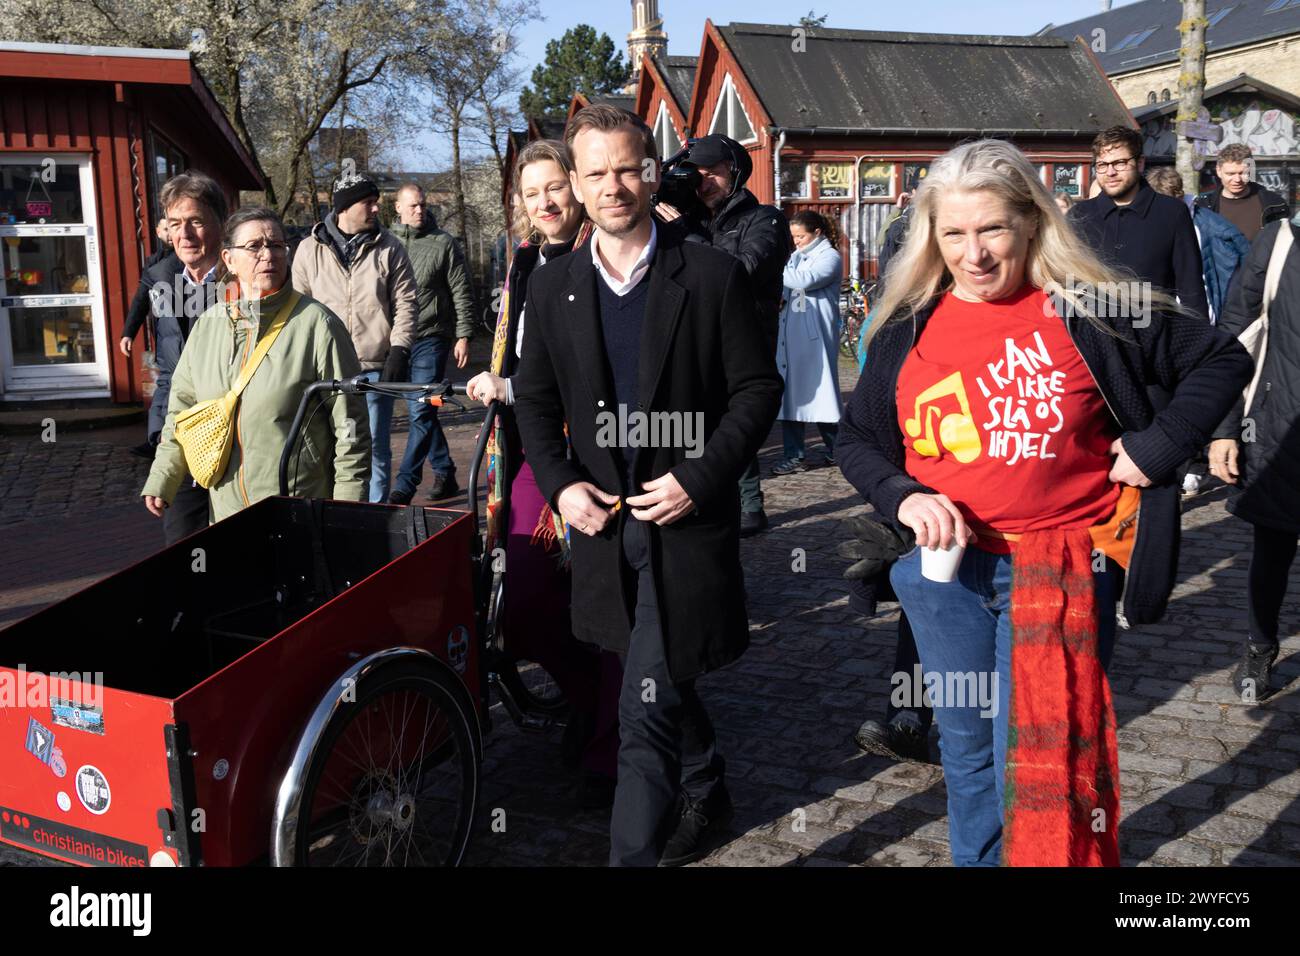 Lord Mayor of Copenhagen Municipality Sophie Haestorp Andersen of the Social Democratic Party and Minister of Justice, Peter Hummelgaard of the Social Democratic Party arrive at Freetown Christiania during a action day Saturday 6 April 2024. At a meeting at Christiania in March, it was decided that the so-called Pusher Street in the famous Copenhagen neighbourhood should be dug up during a so-called action day 6 April. It is planned that Christianitter aided by workmen will dig up the street. People from outside Christiania are welcome to participate as informed by Christiania s spokesperson. Stock Photo